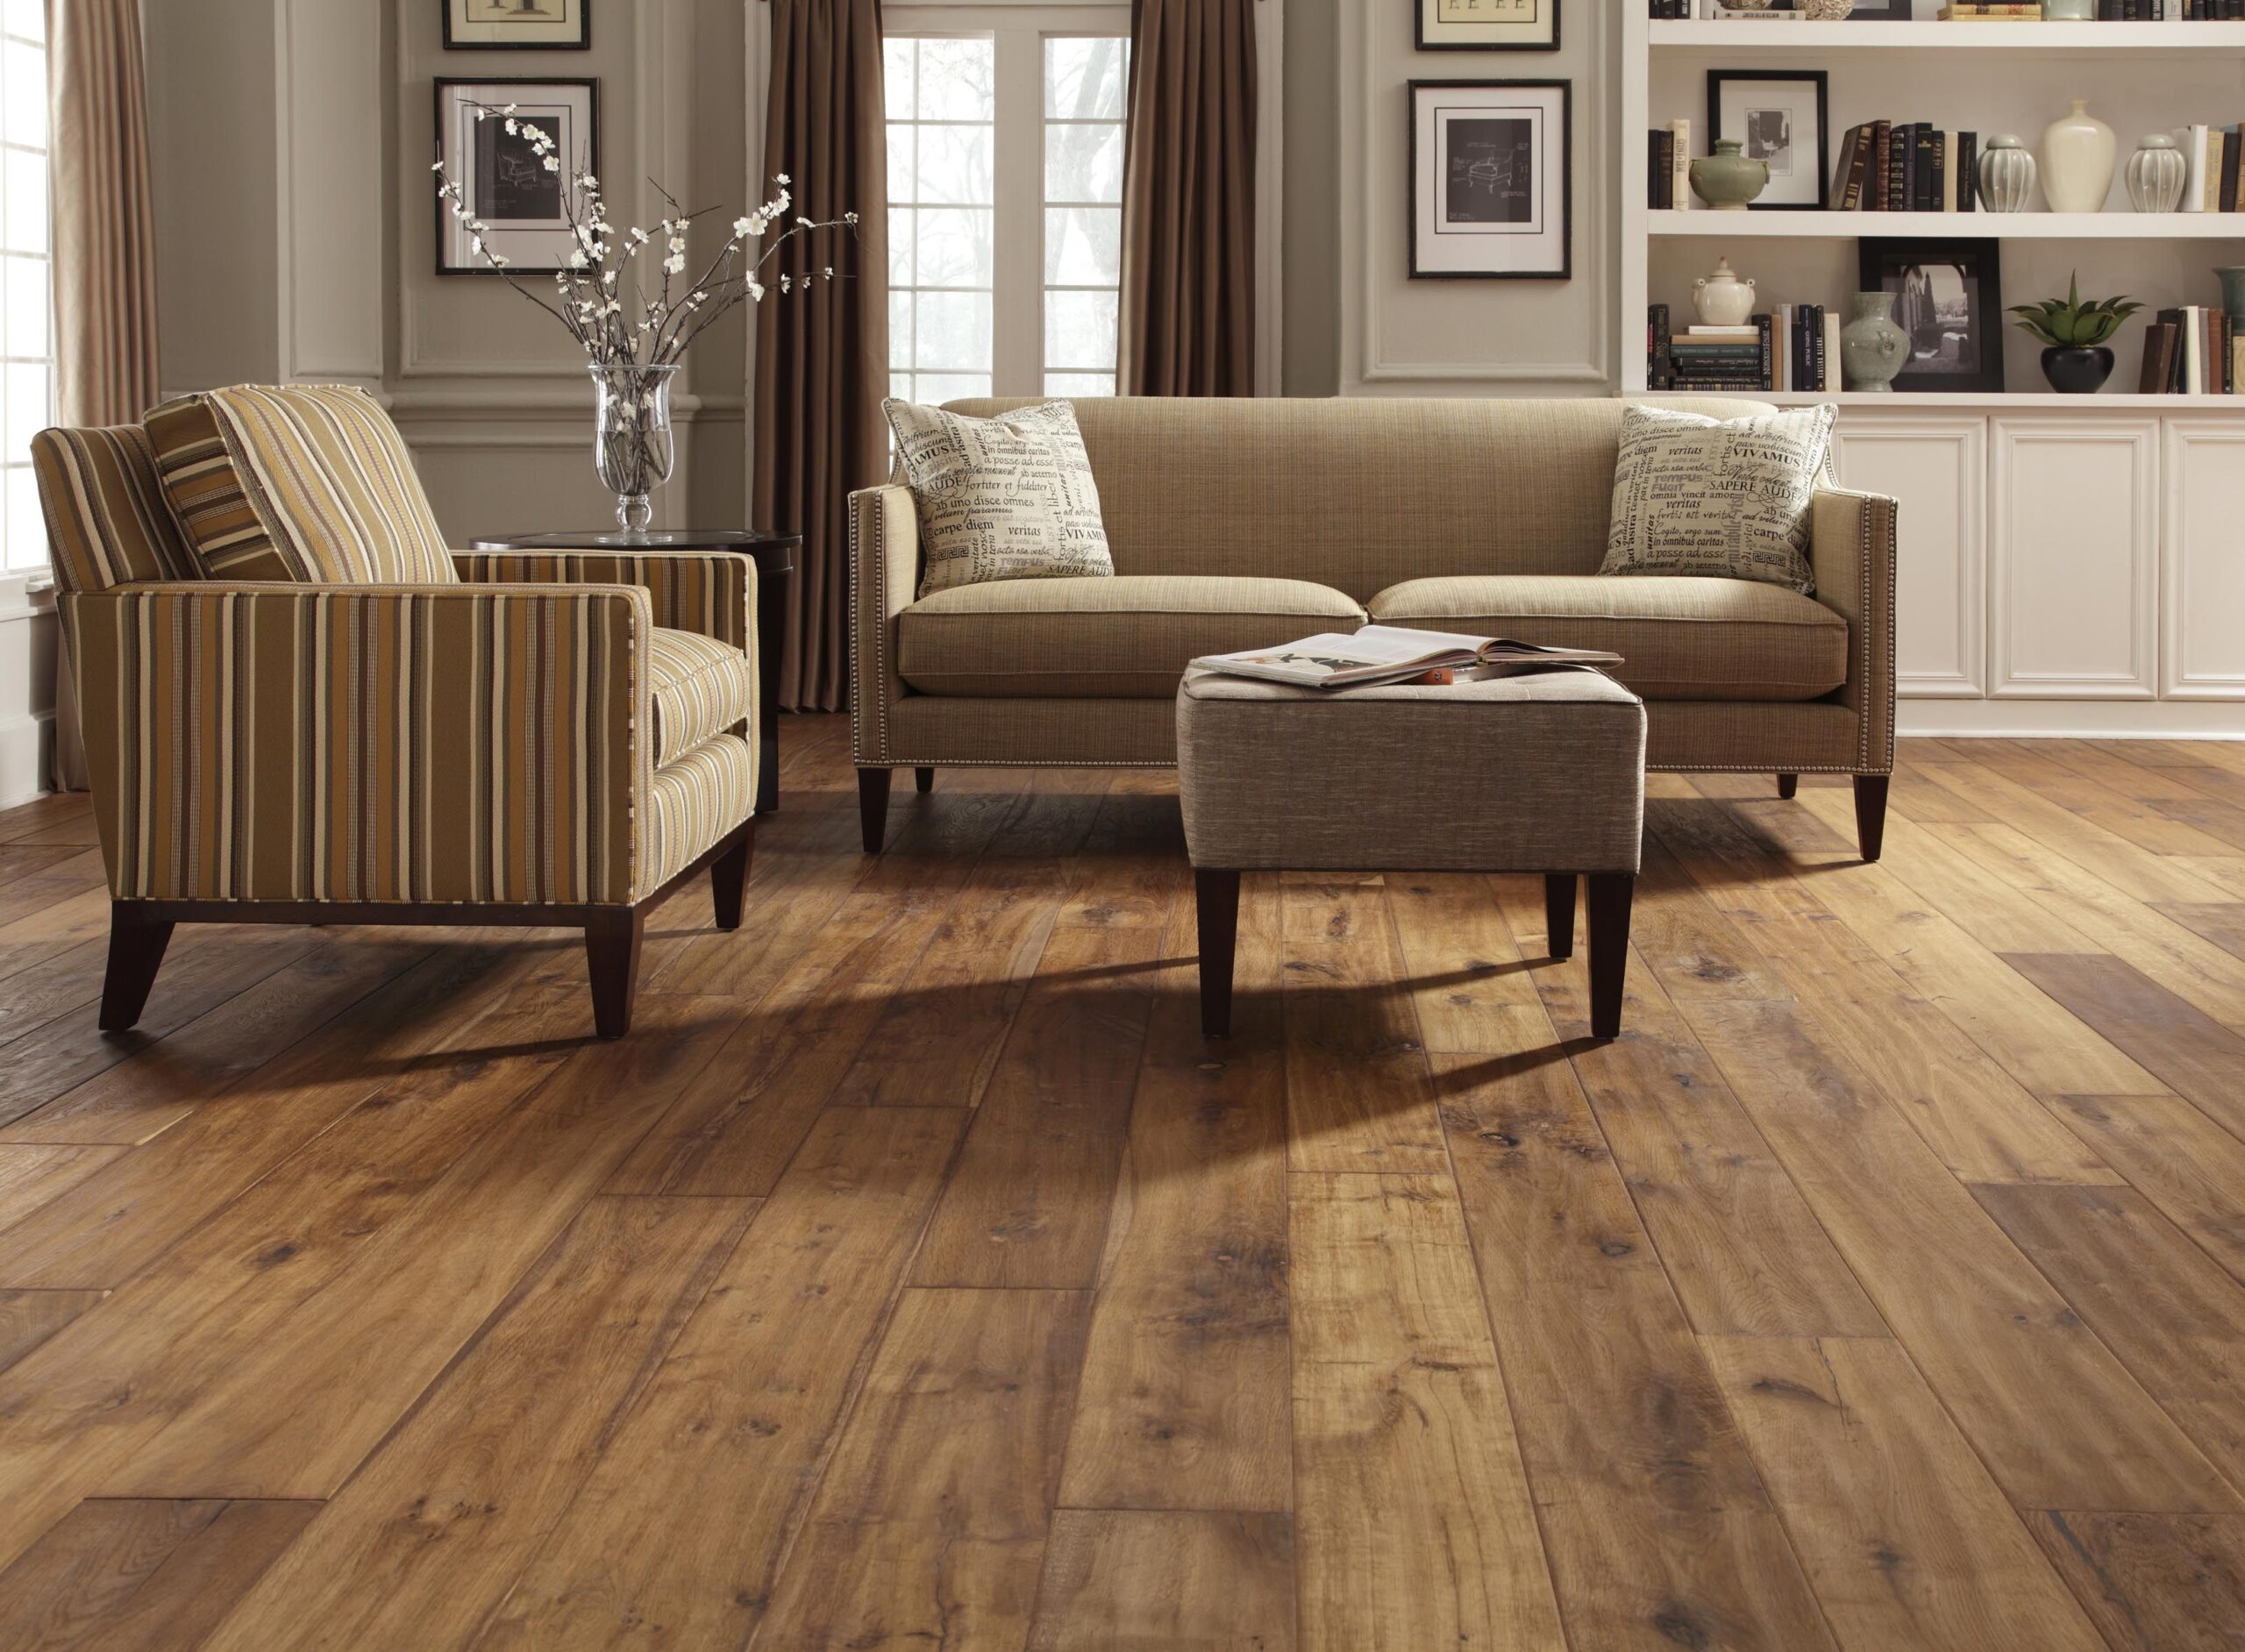 5 Best Laminate Flooring Colours For, What Company Makes The Best Laminate Flooring